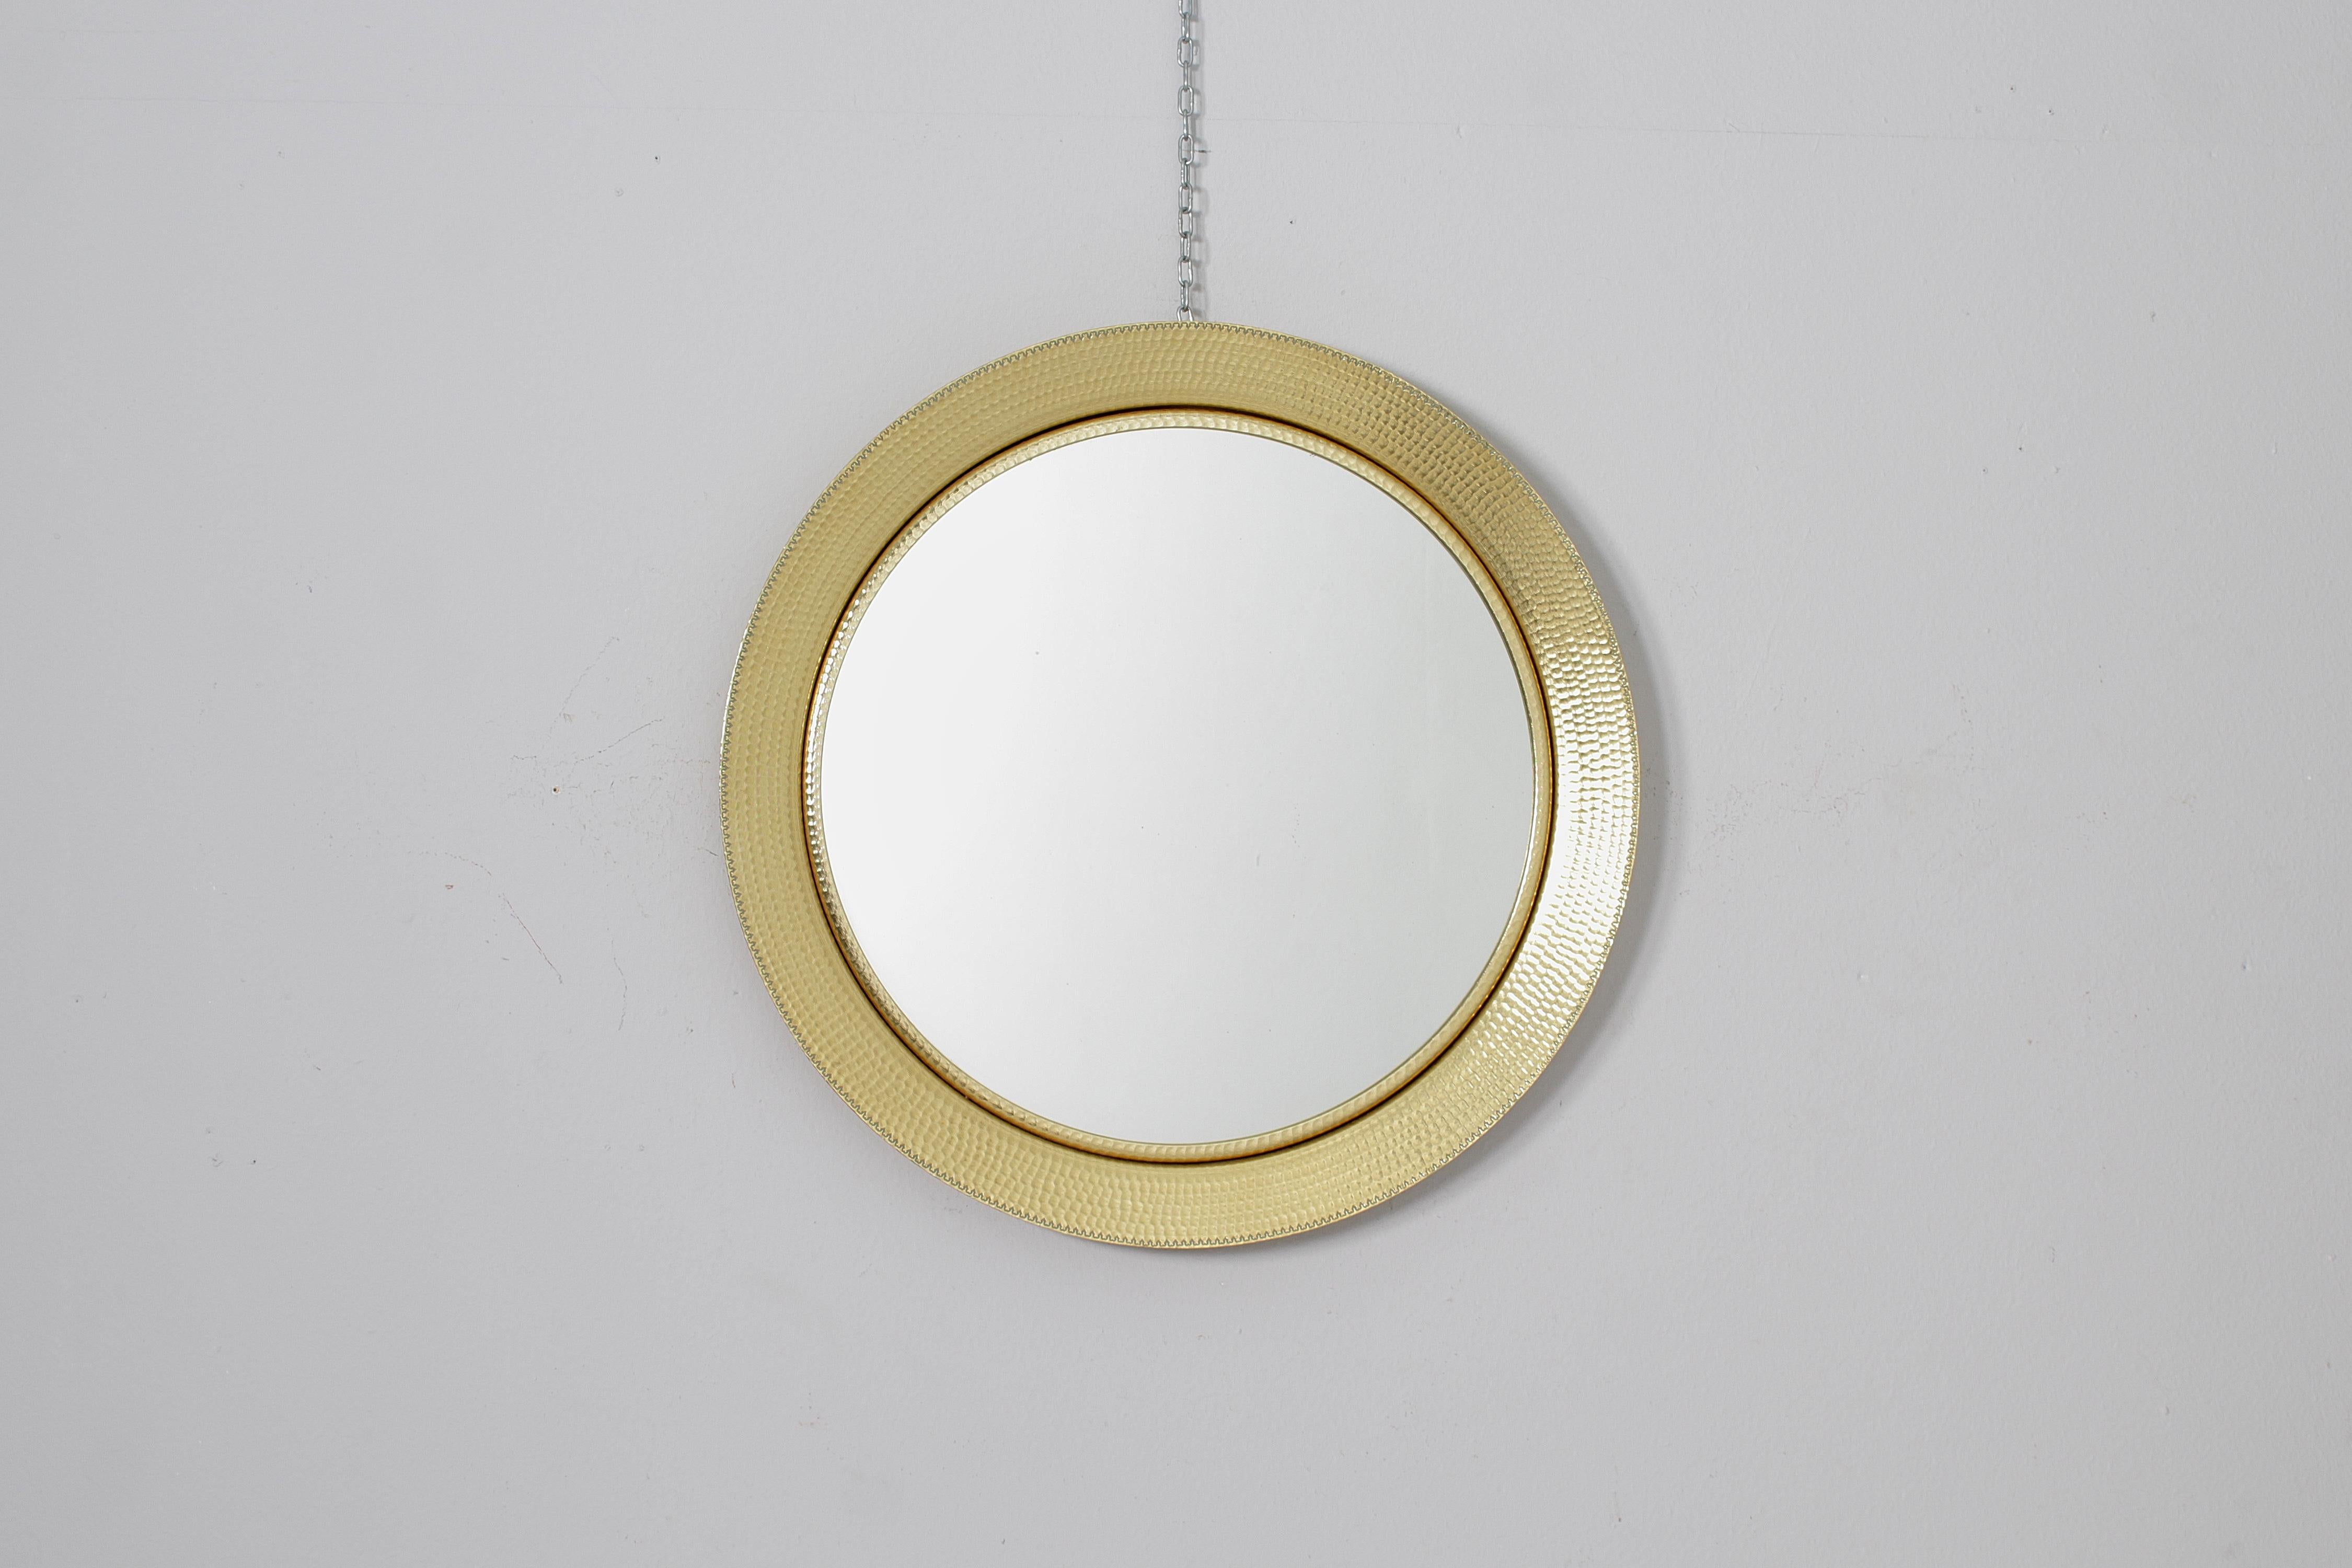 Beautiful round wall mirror with large frame enclosed in gilded aluminium, hammered with decorative engraving motif along the external circumference. Attributable to Lorenzo Burchiellaro, 60s Italy .
Wear consistent with age and use.